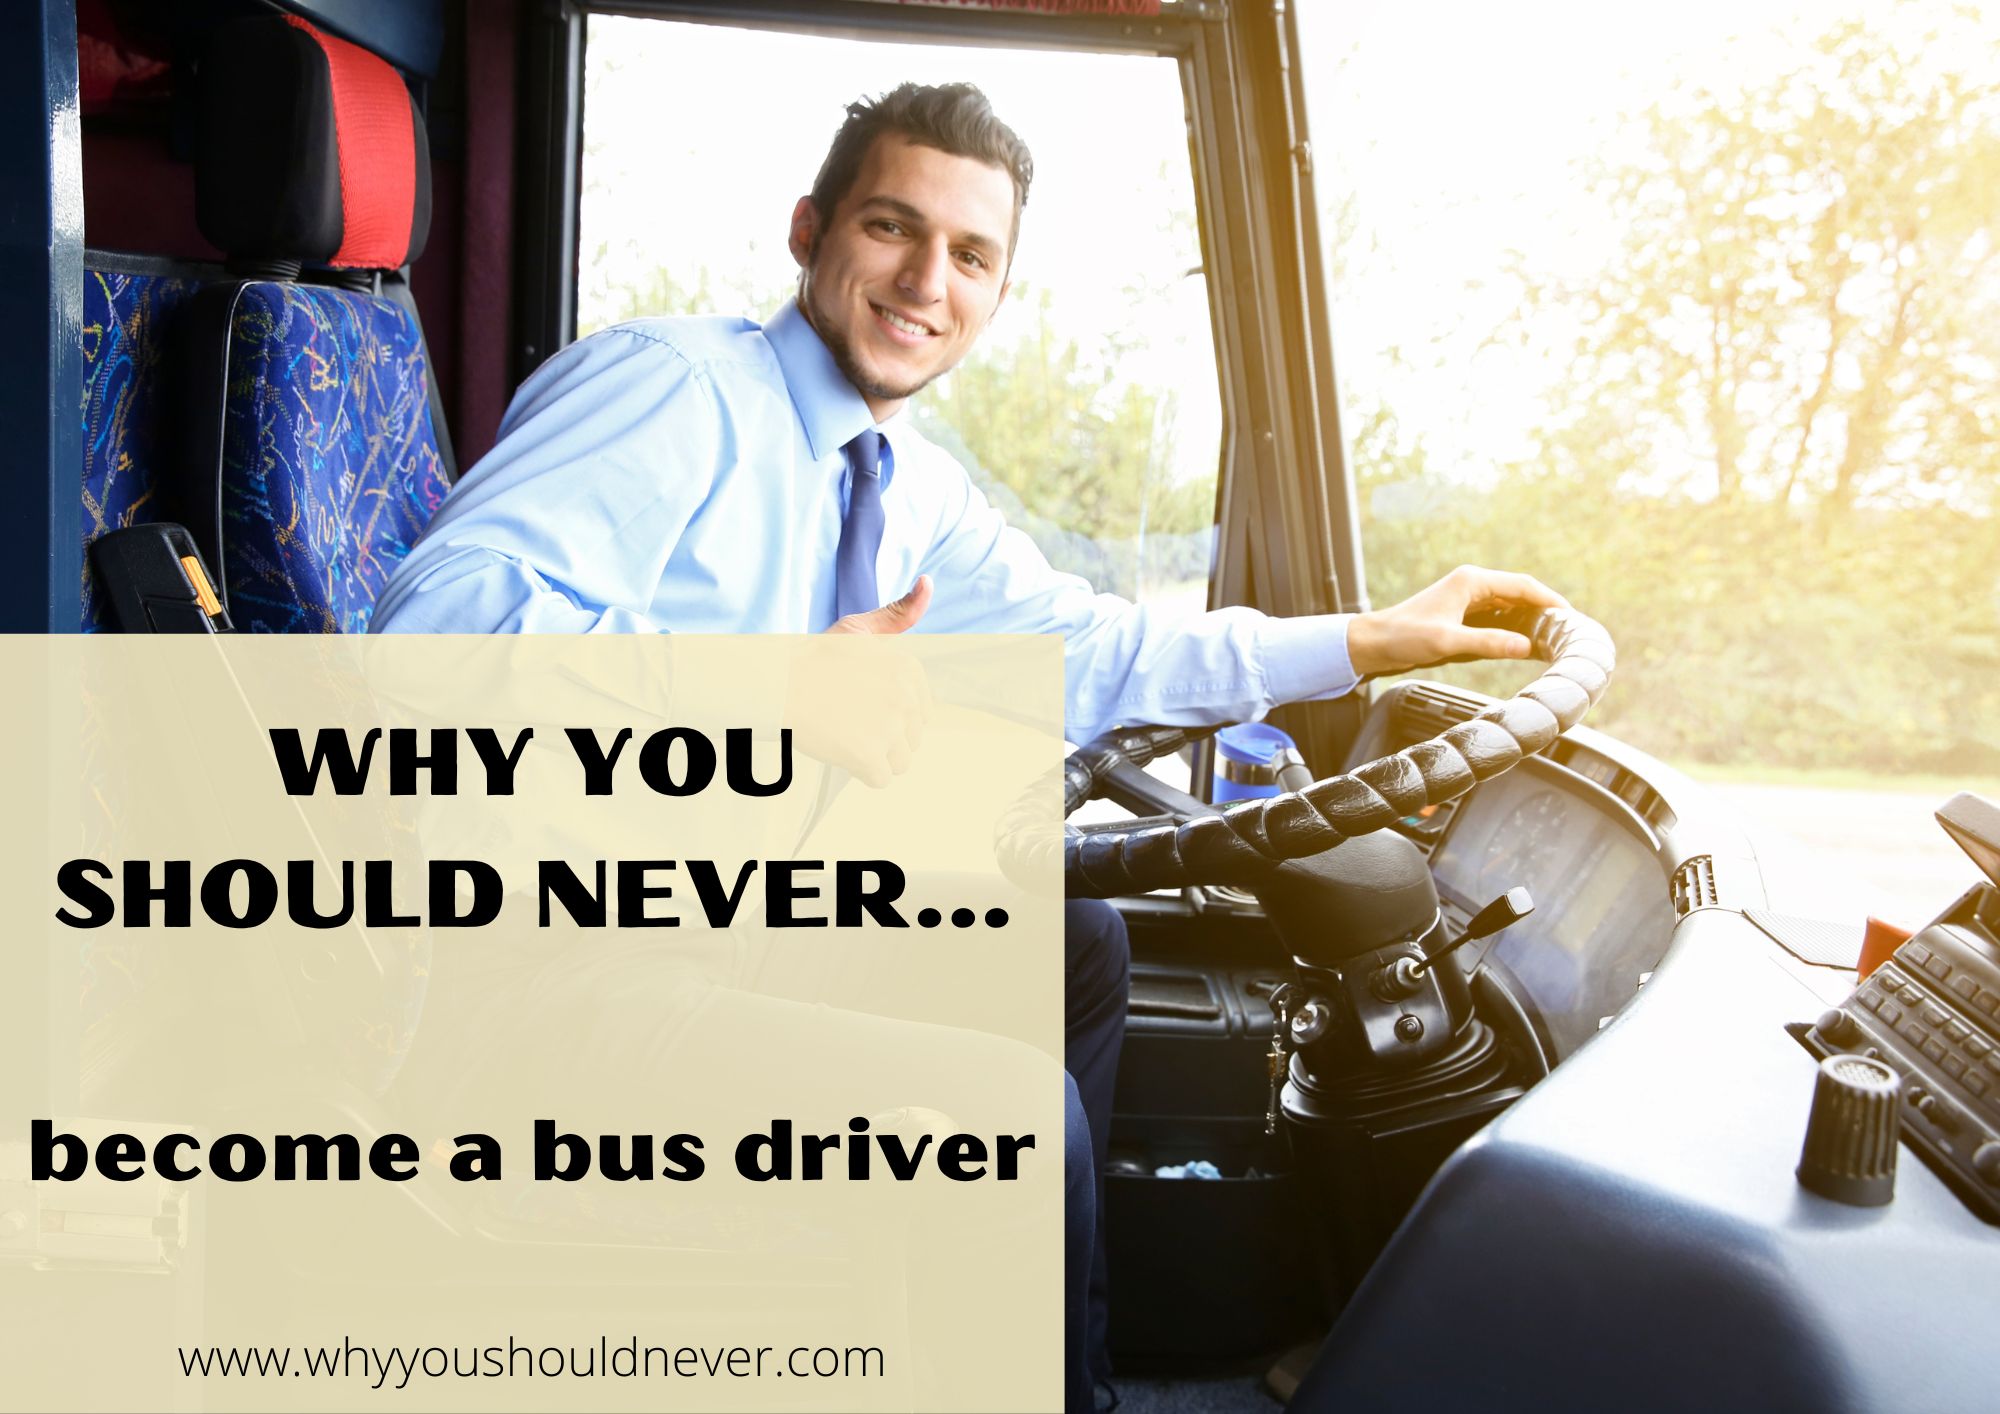 Why You Should Never Become A Bus Driver